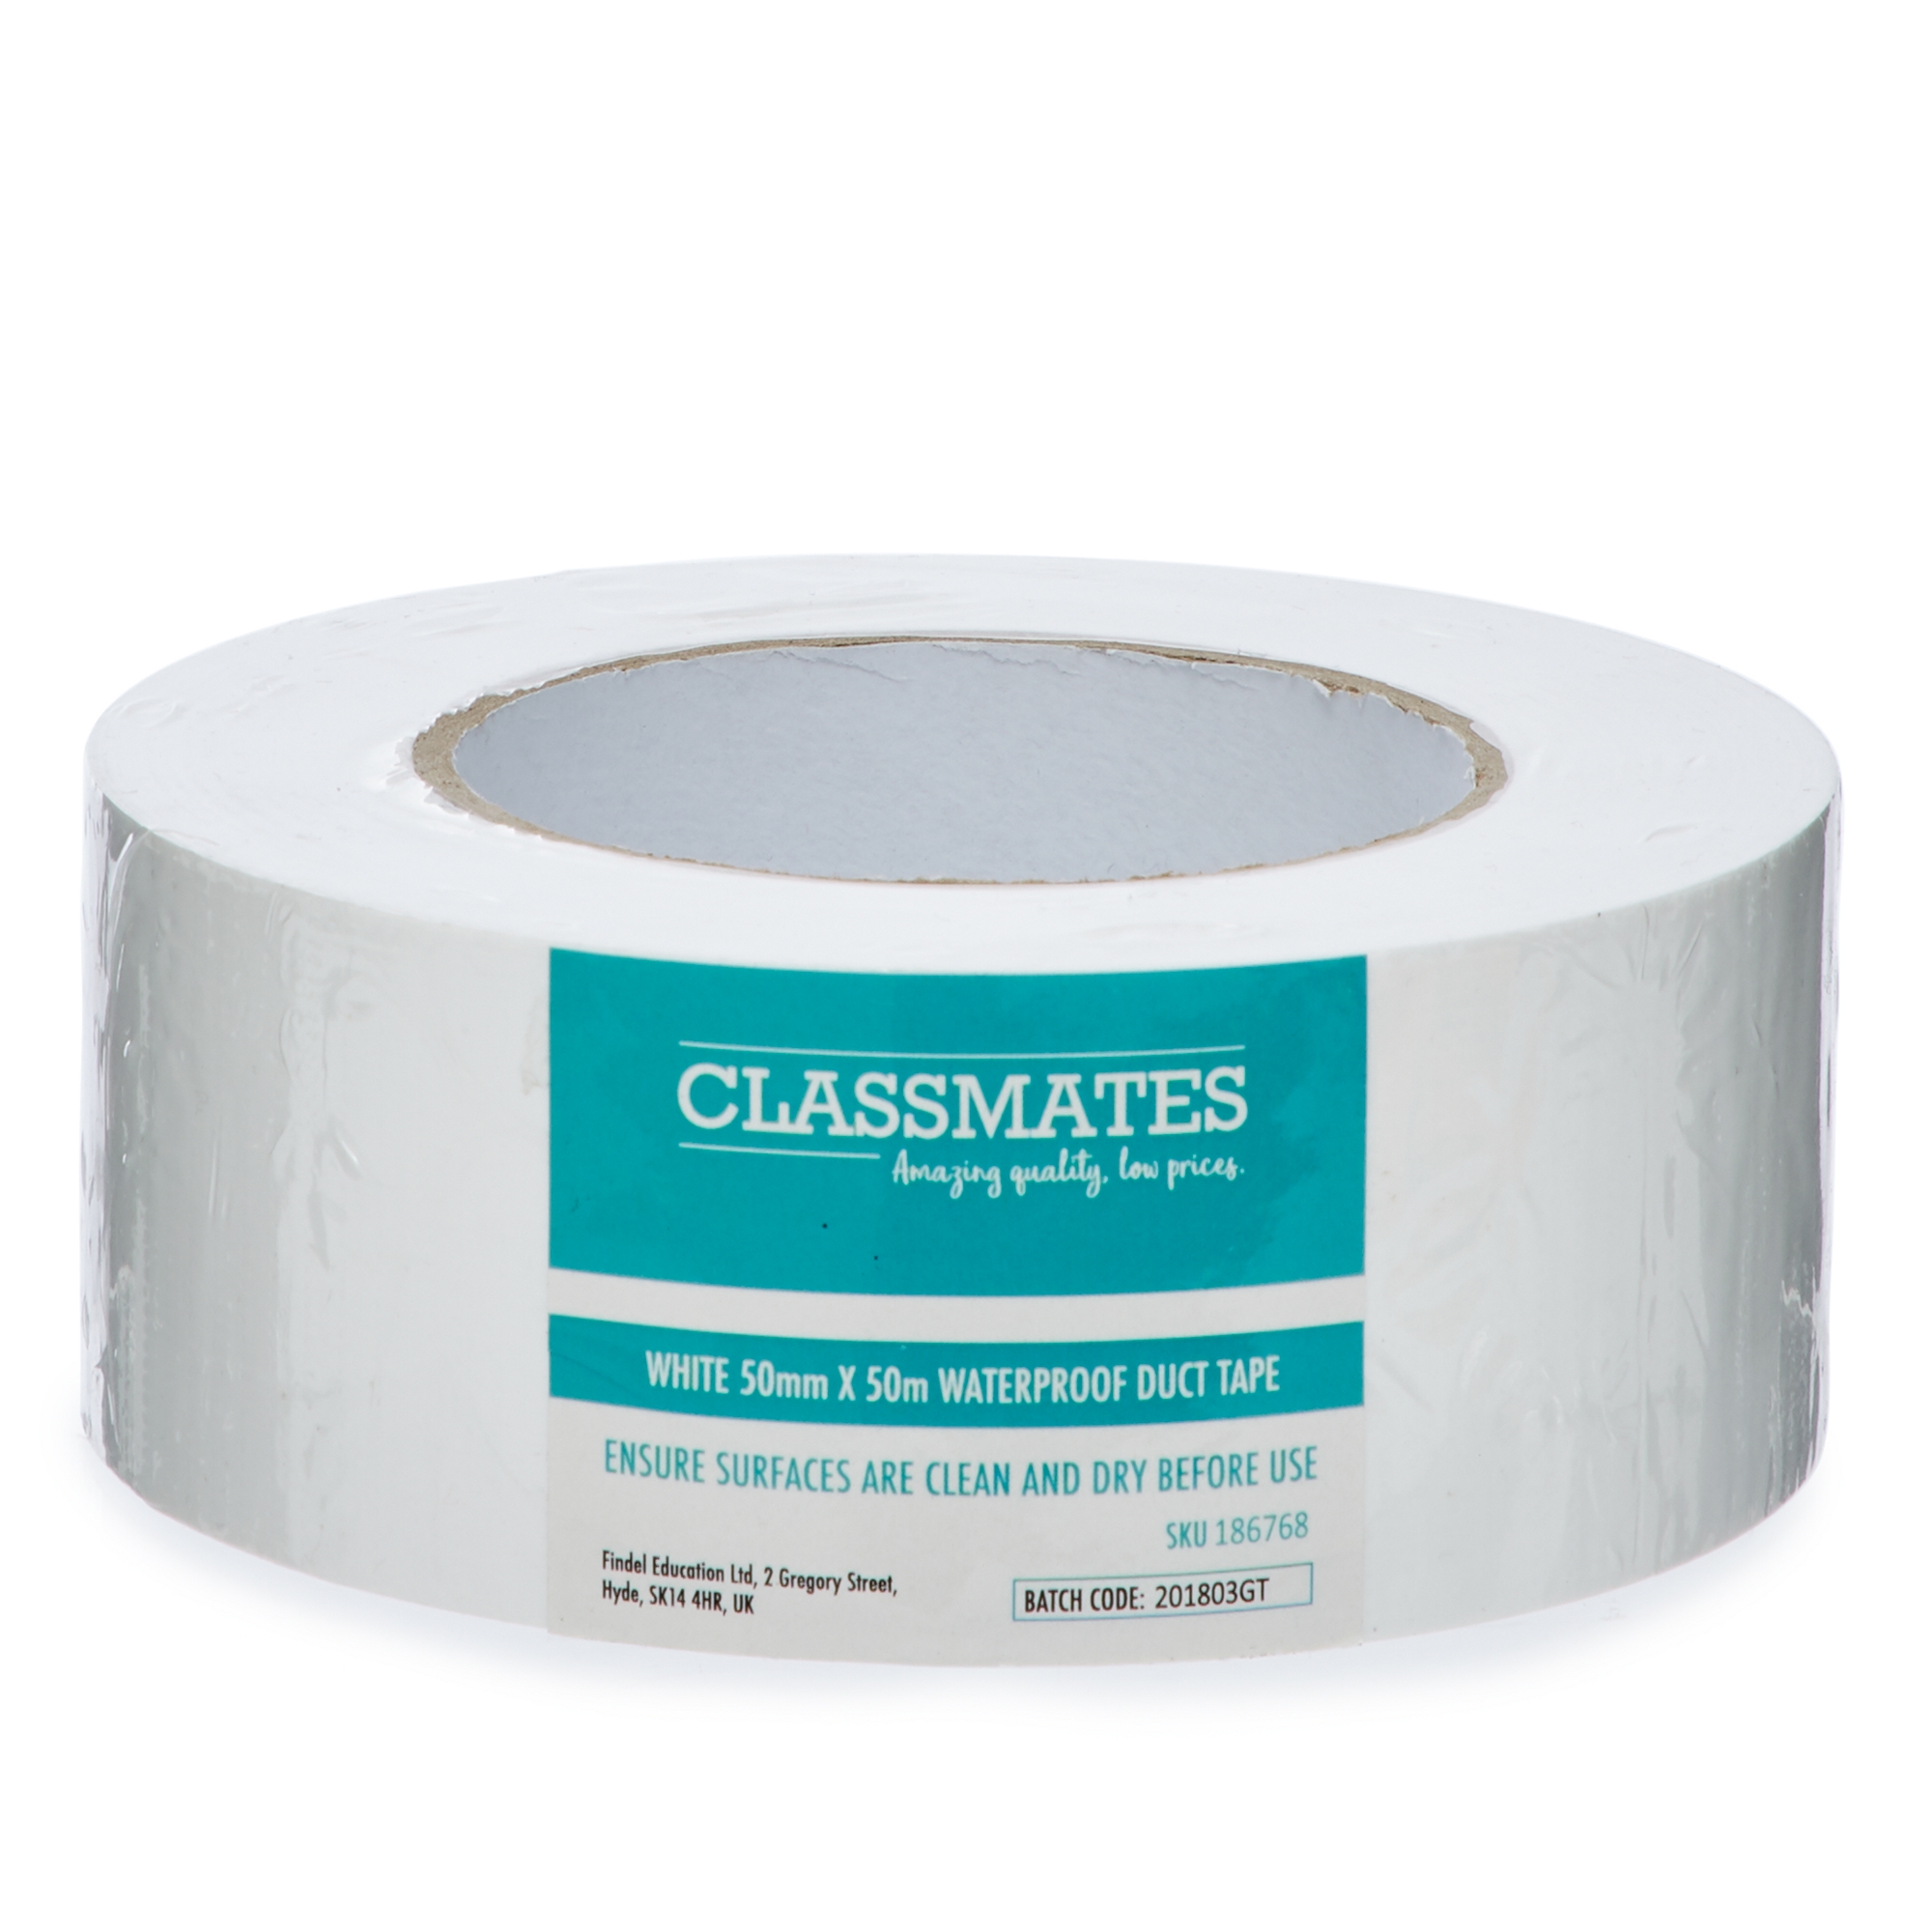 Waterproof Cloth Duct Tape - White